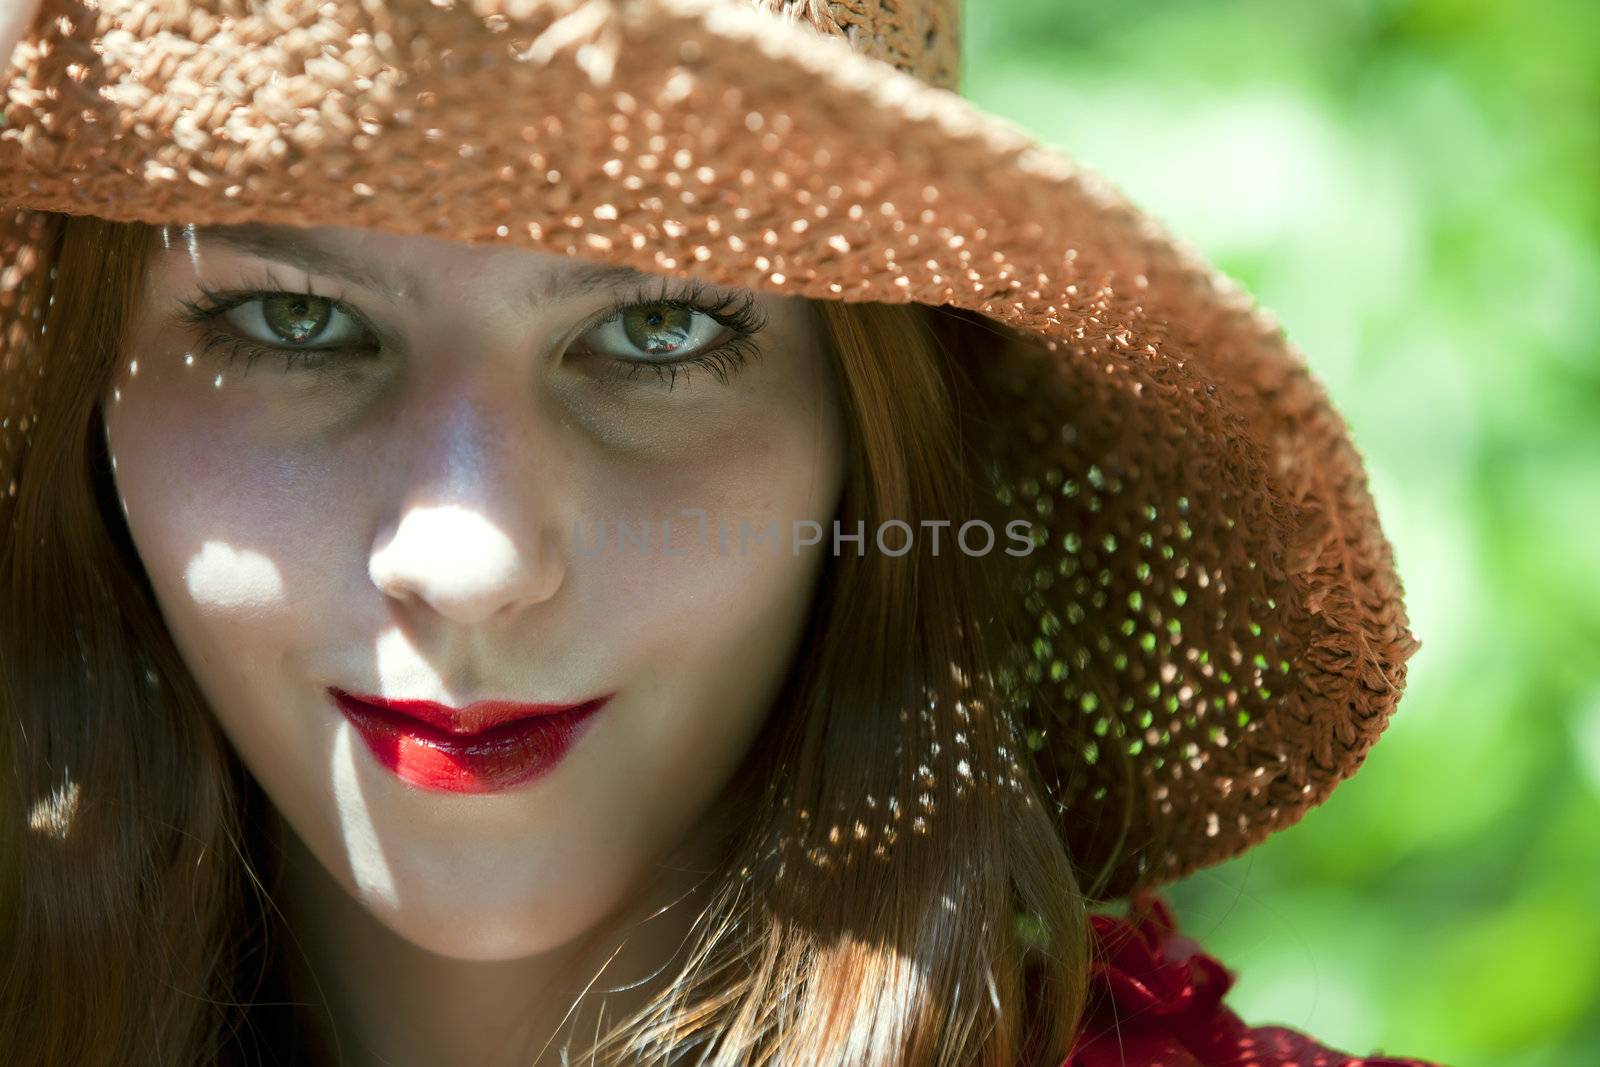 Portait of a younf woman with beautiful eyes and red lips